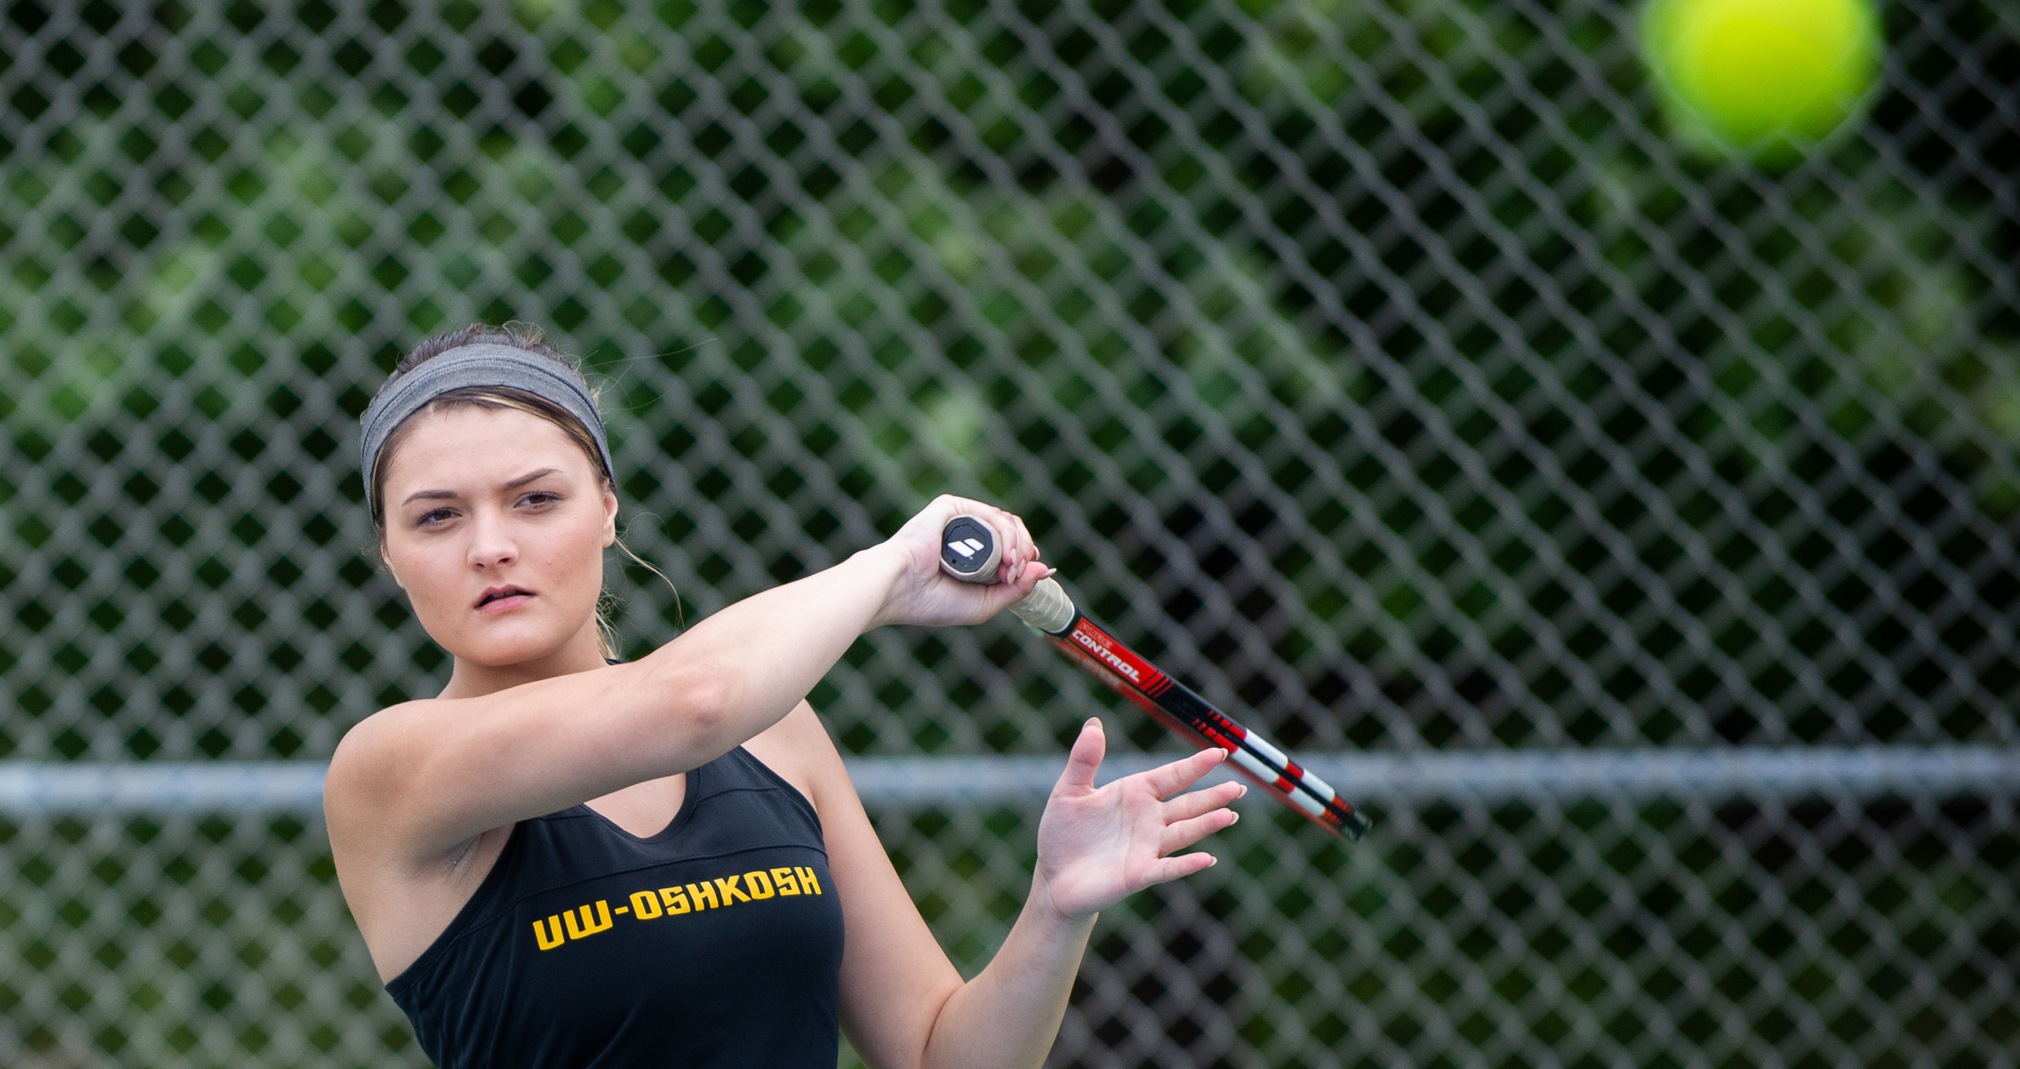 Kelley Hodyl competed at No. 1 singles and No. 3 doubles against Wellesley College.